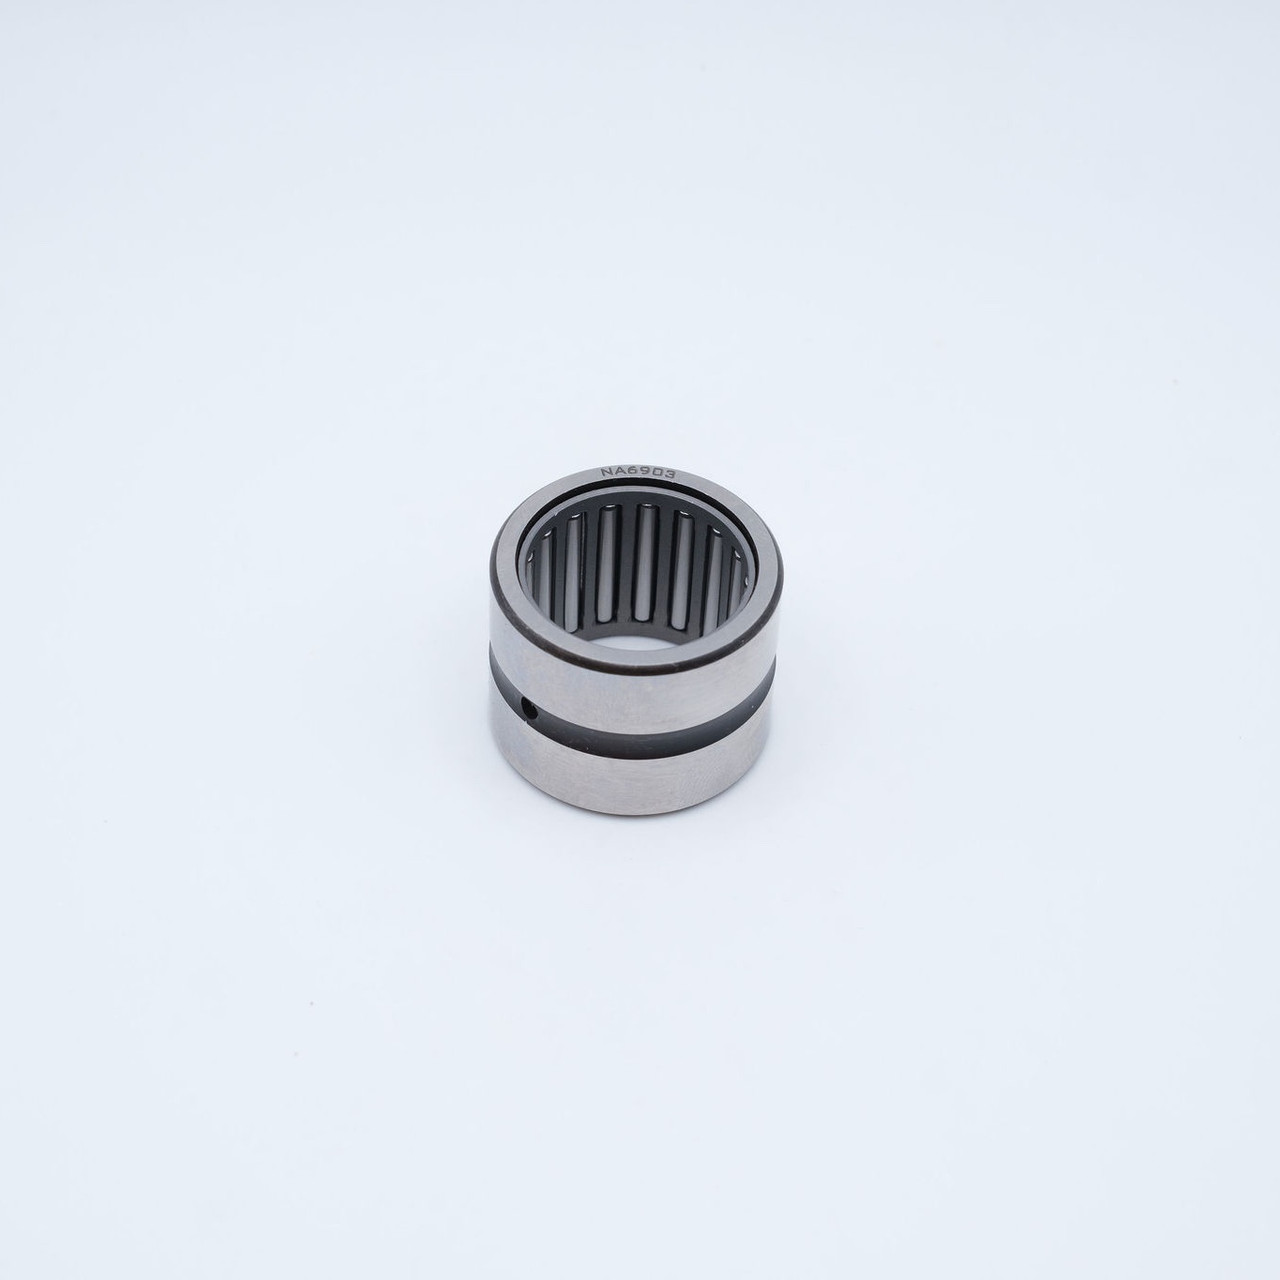 RNA4903 Machined Needle Roller 22x30x13 Front View